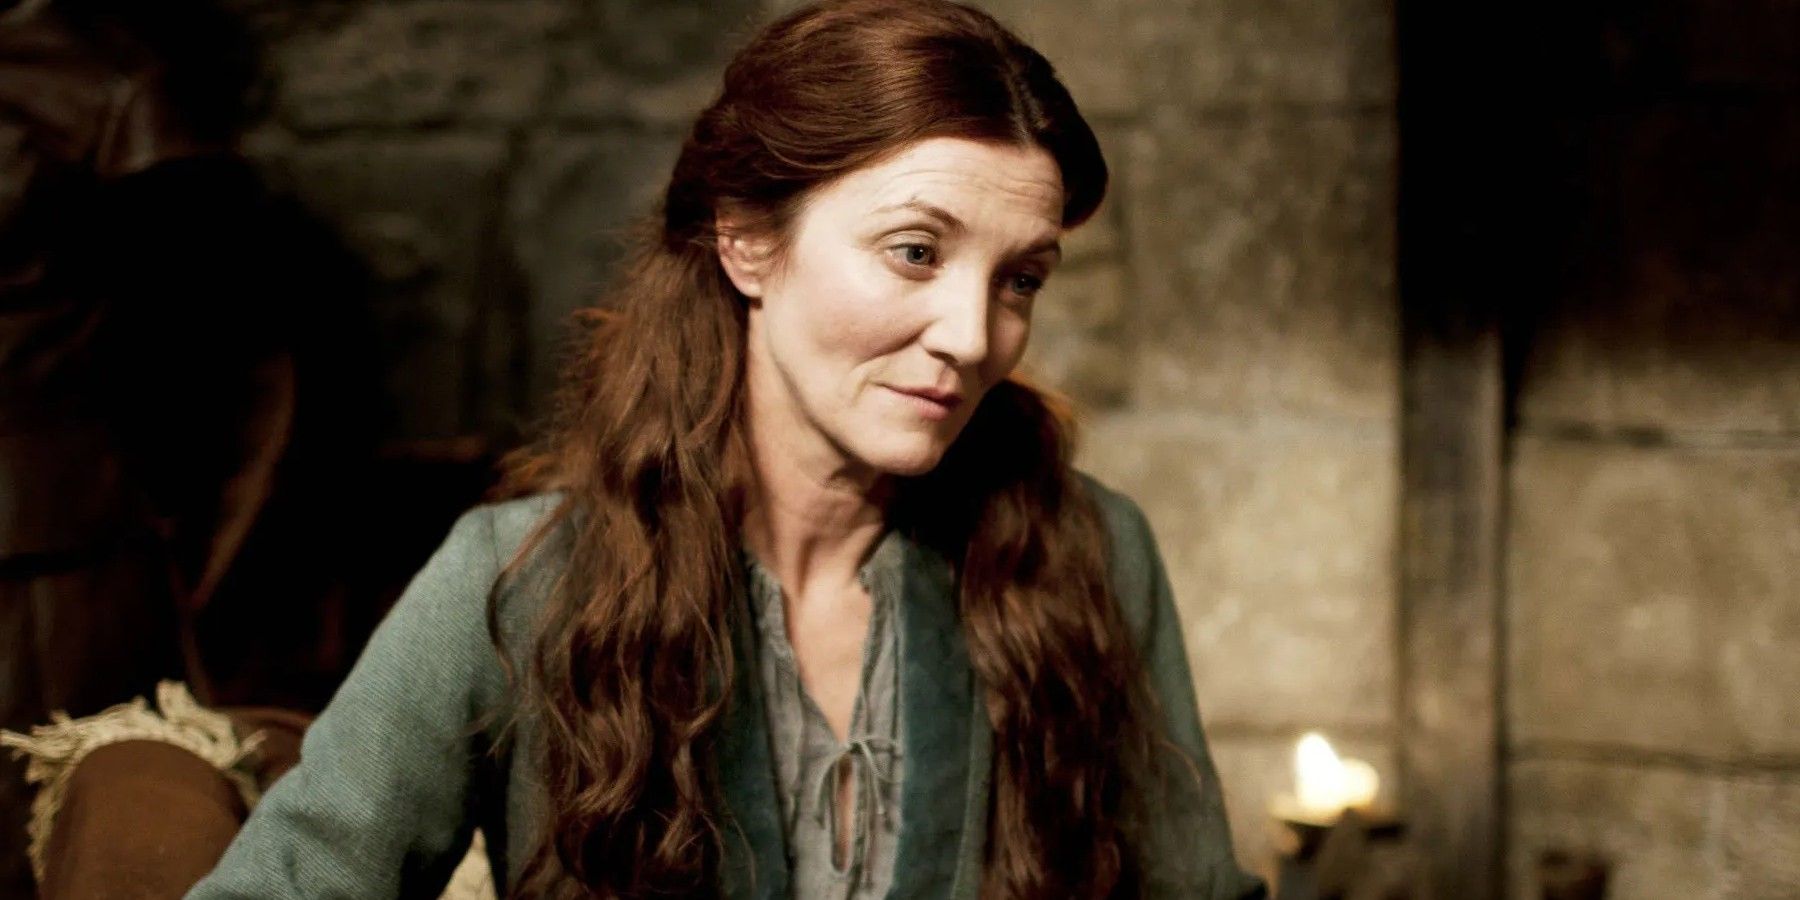 Catelyn Stark looking concerned in Game of Thrones